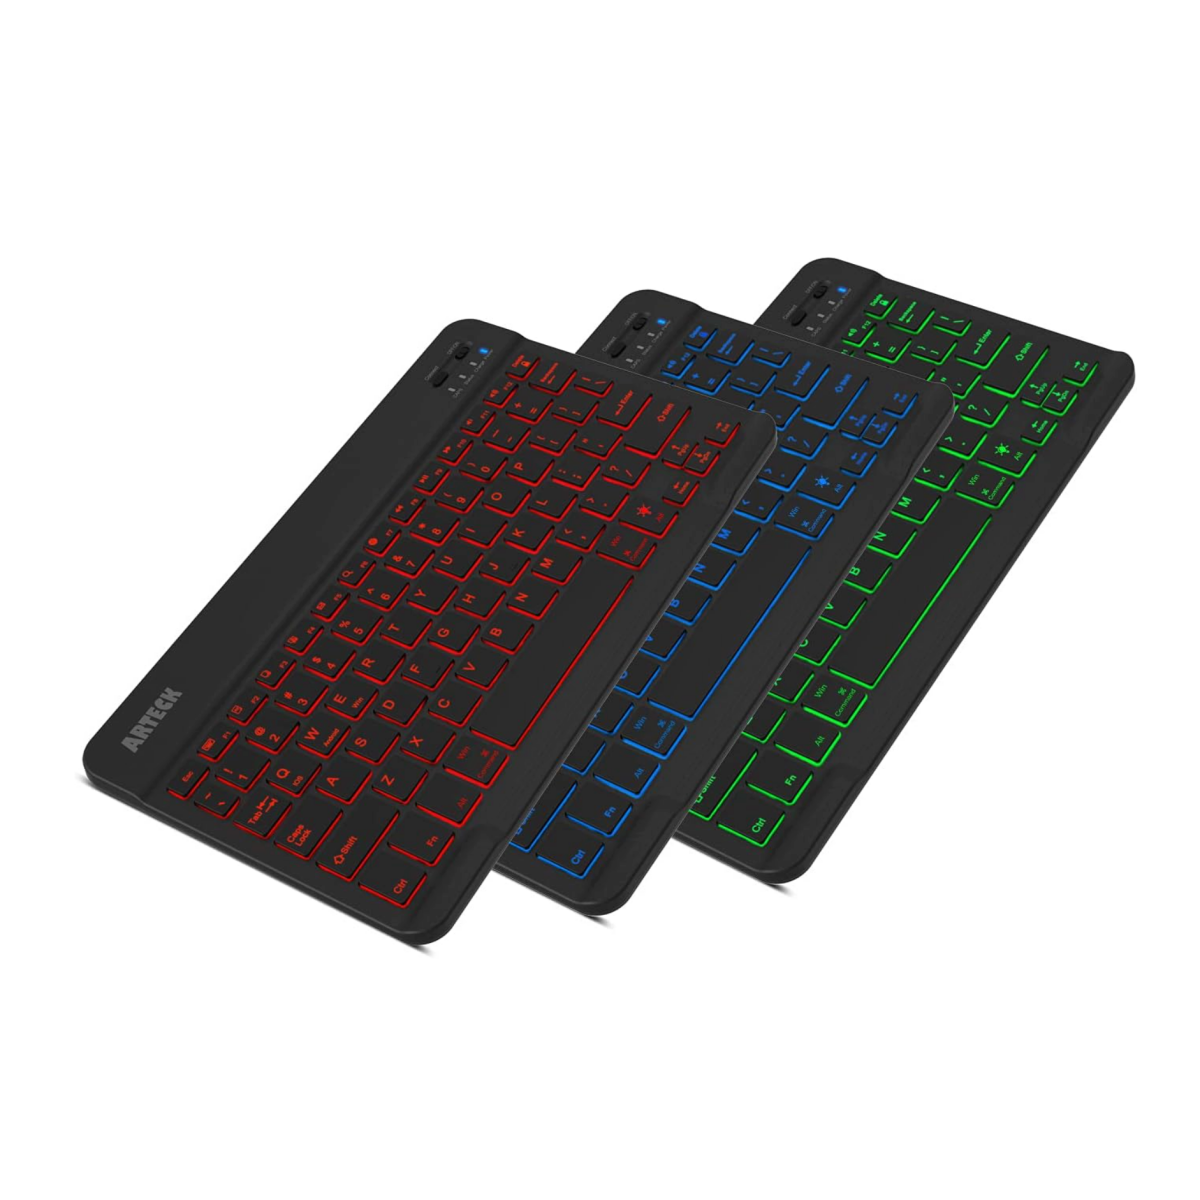 Three Arteck HB030B wireless keyboards with different colored backlights